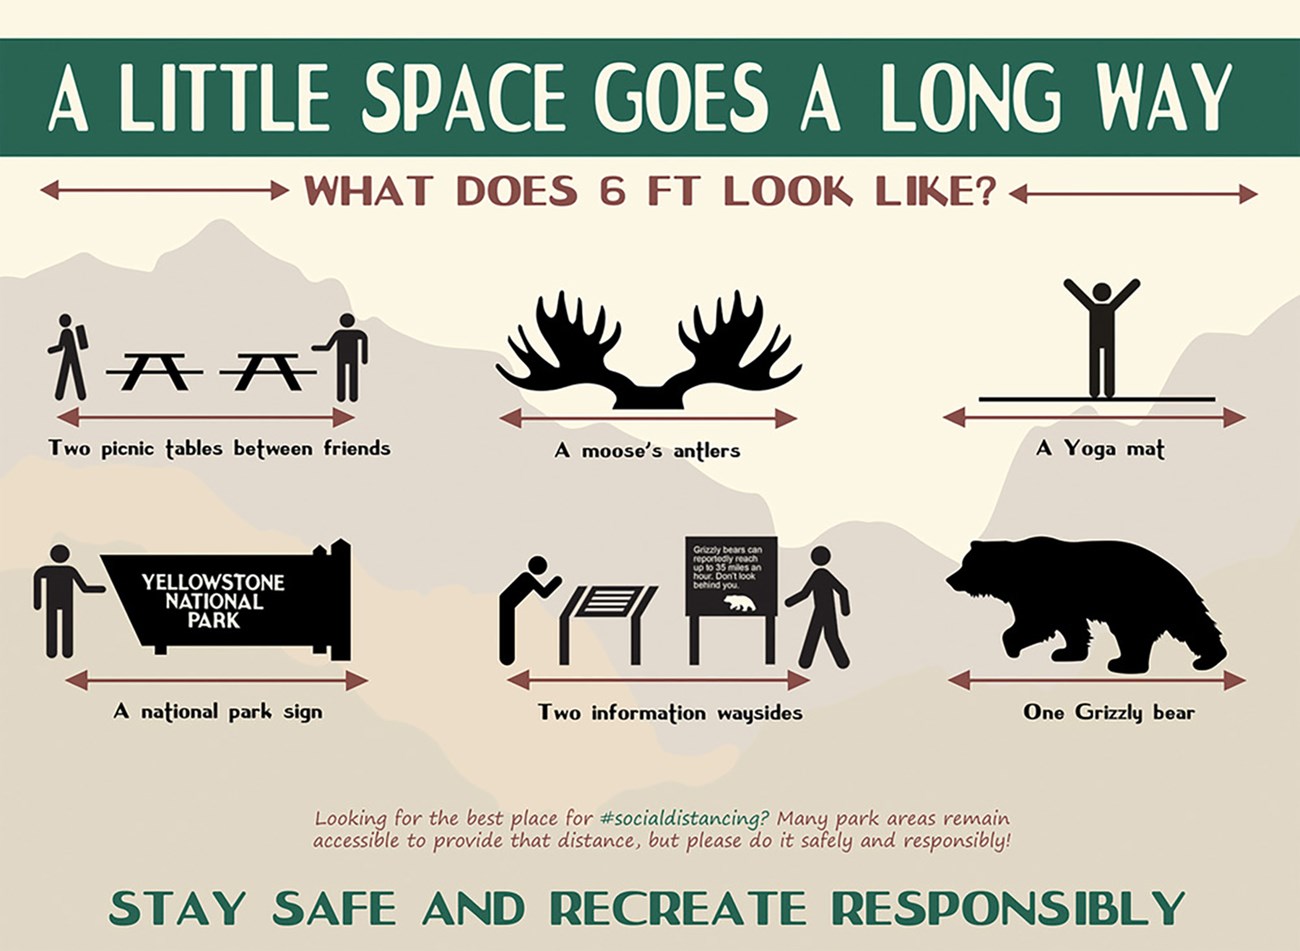 Infographic with text reading "A Little Space Goes a Long Way. Stay Safe and Recreate Responsibly. Looking for the best place for #socialdistancing? Many park areas remain accessible to provide that distance, but please do it safely and responsibly!